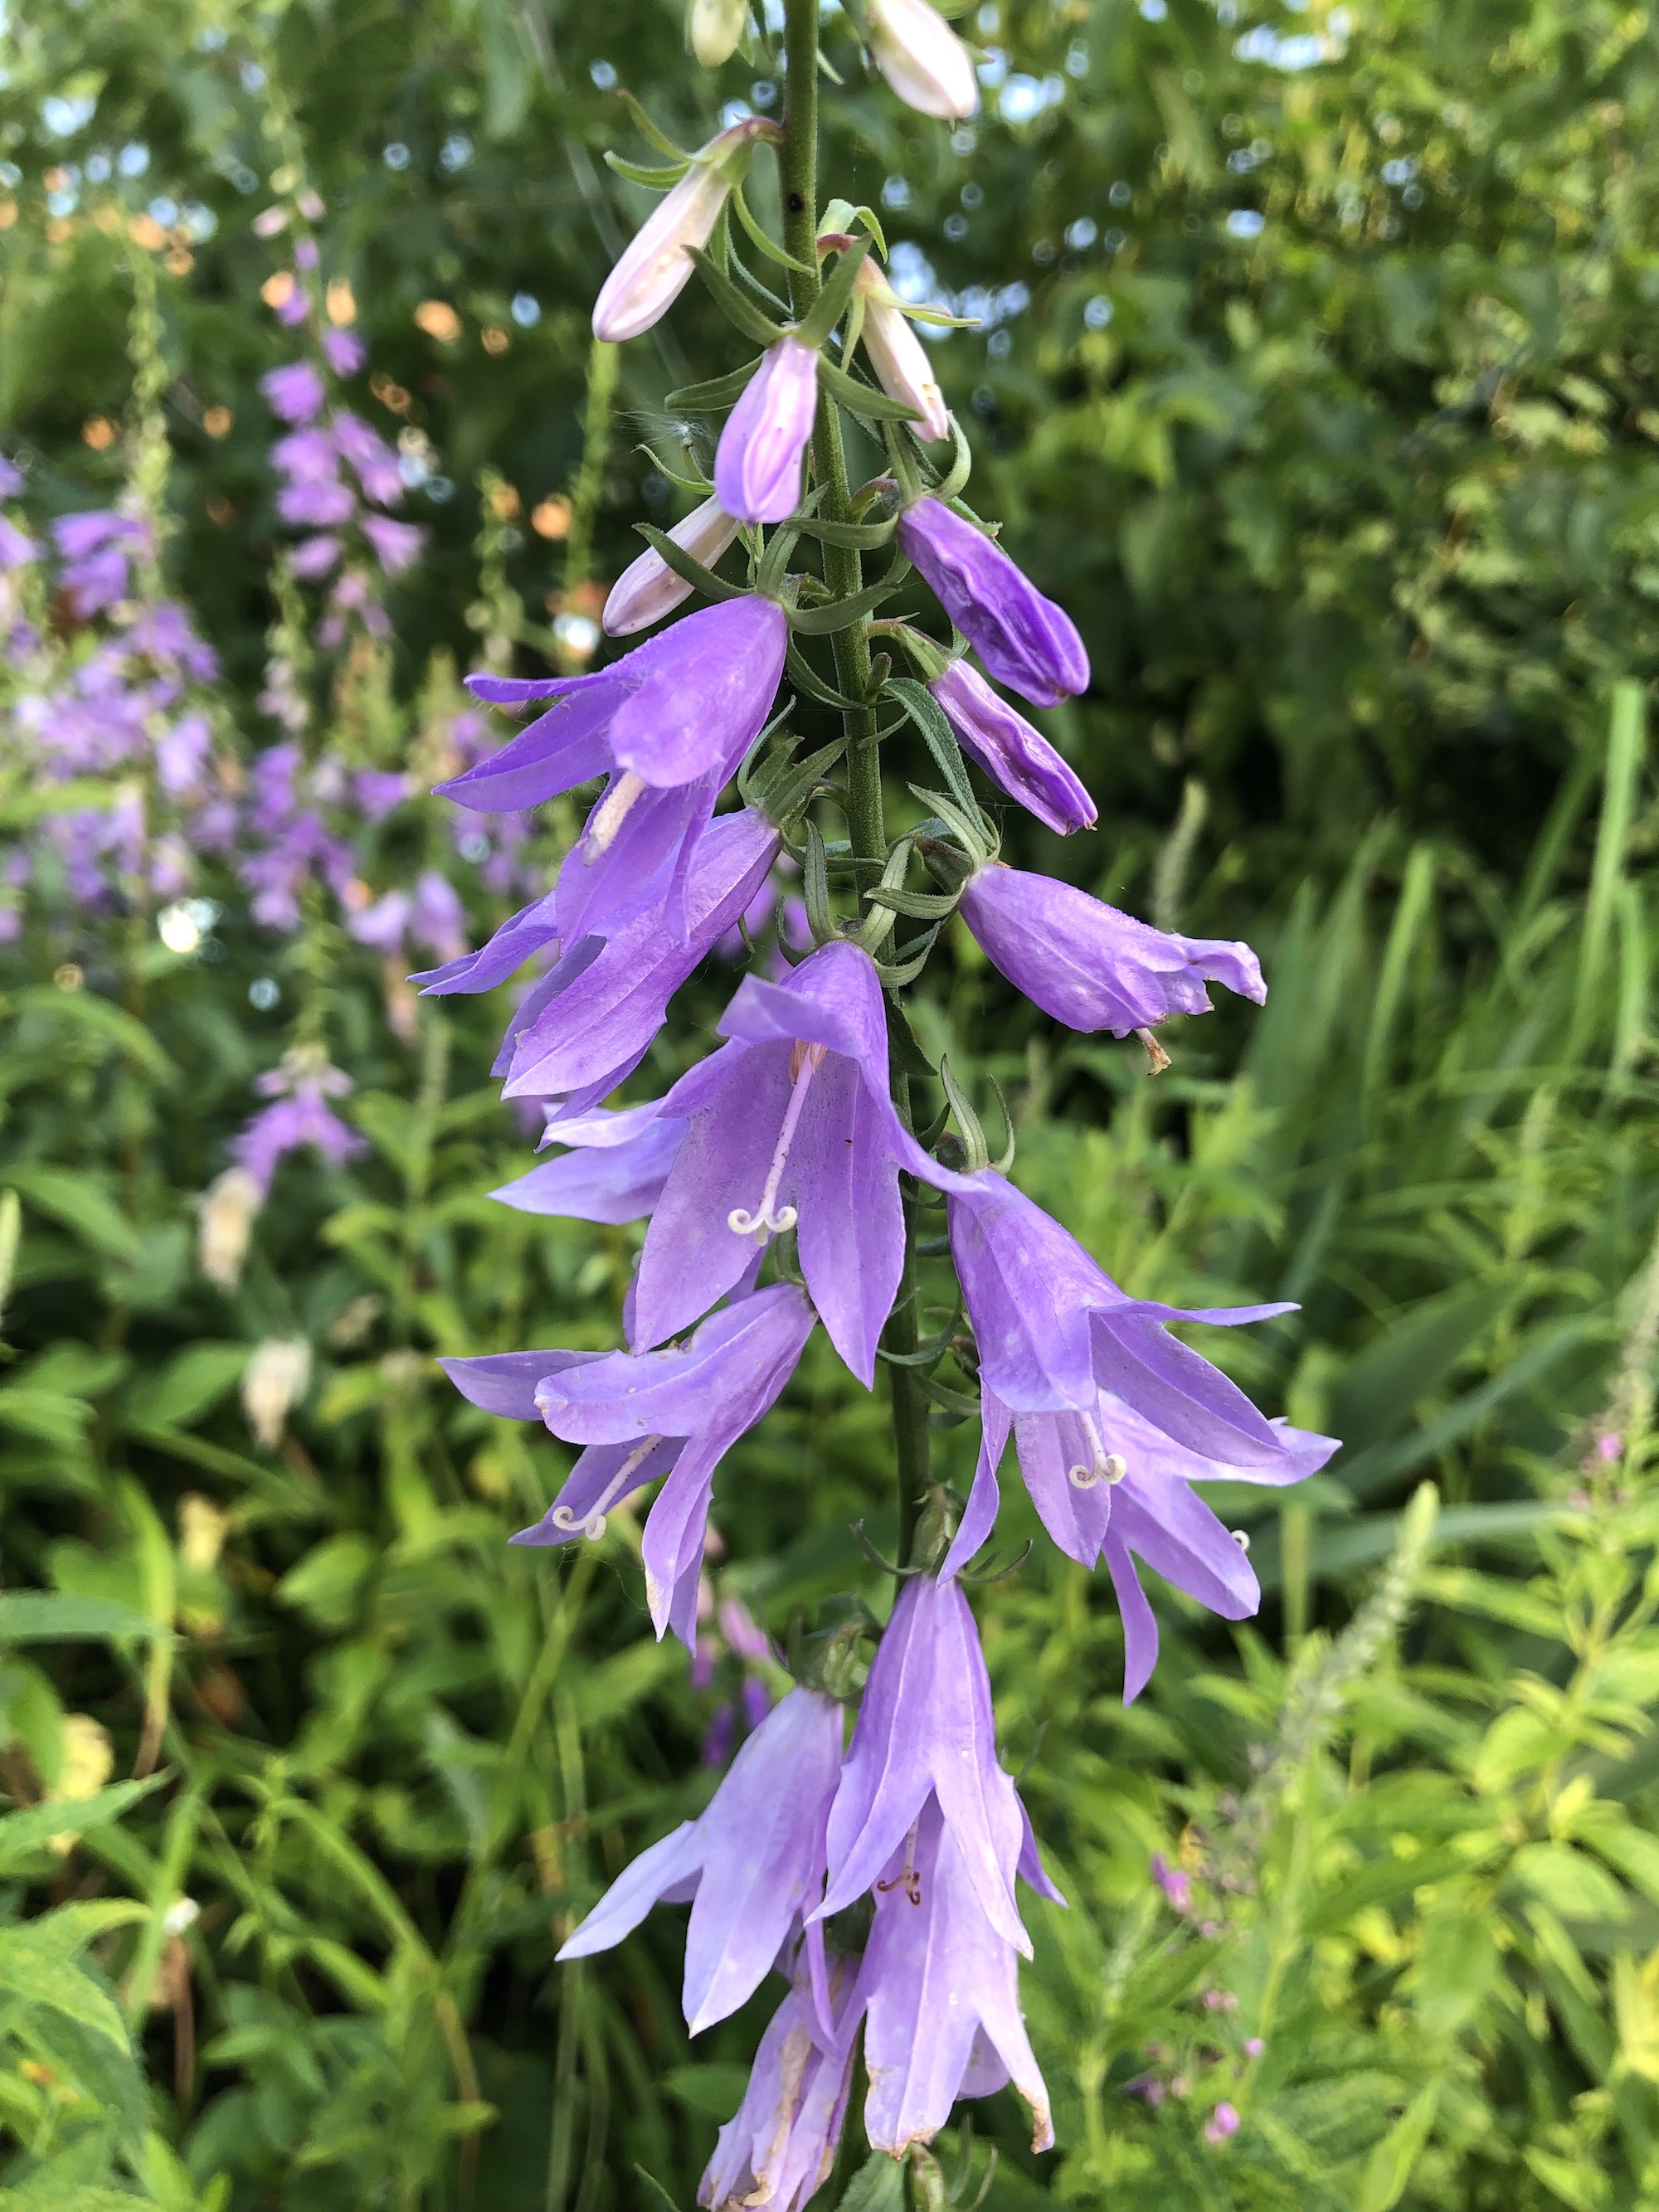 Creeping Bellflower by home in Madison, Wisconsin on July 8, 2019.